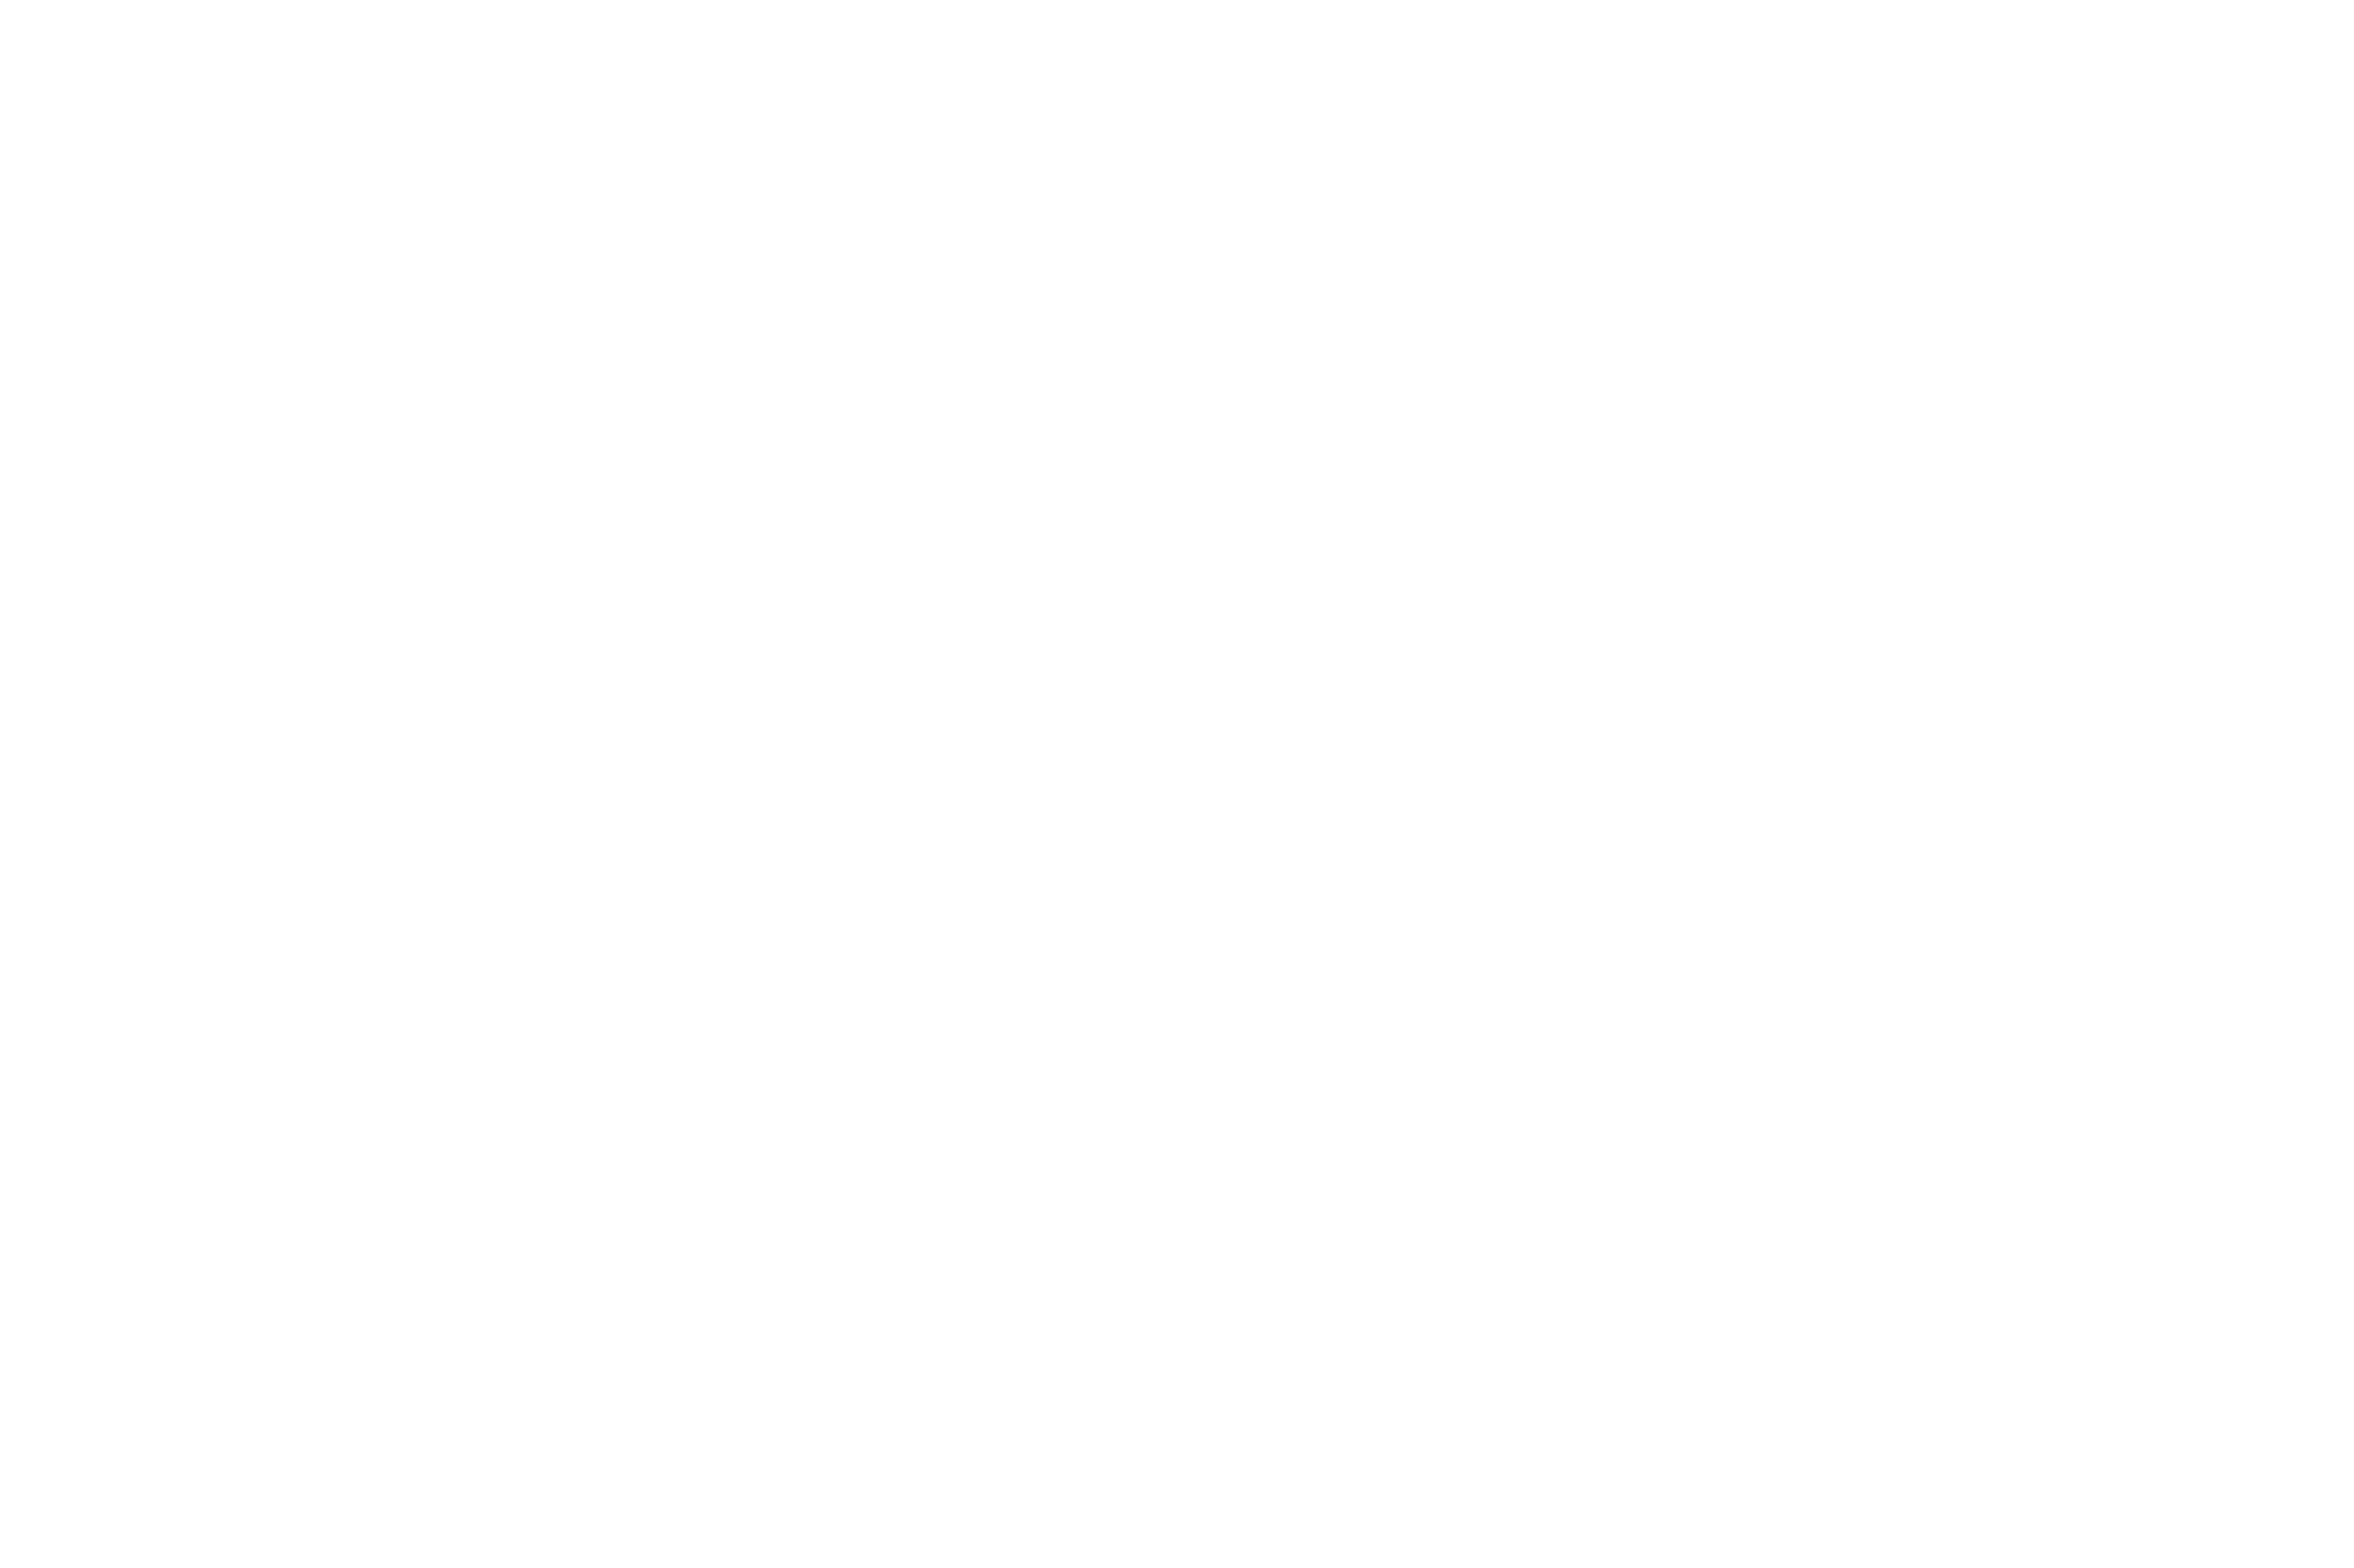 This is our shot logo